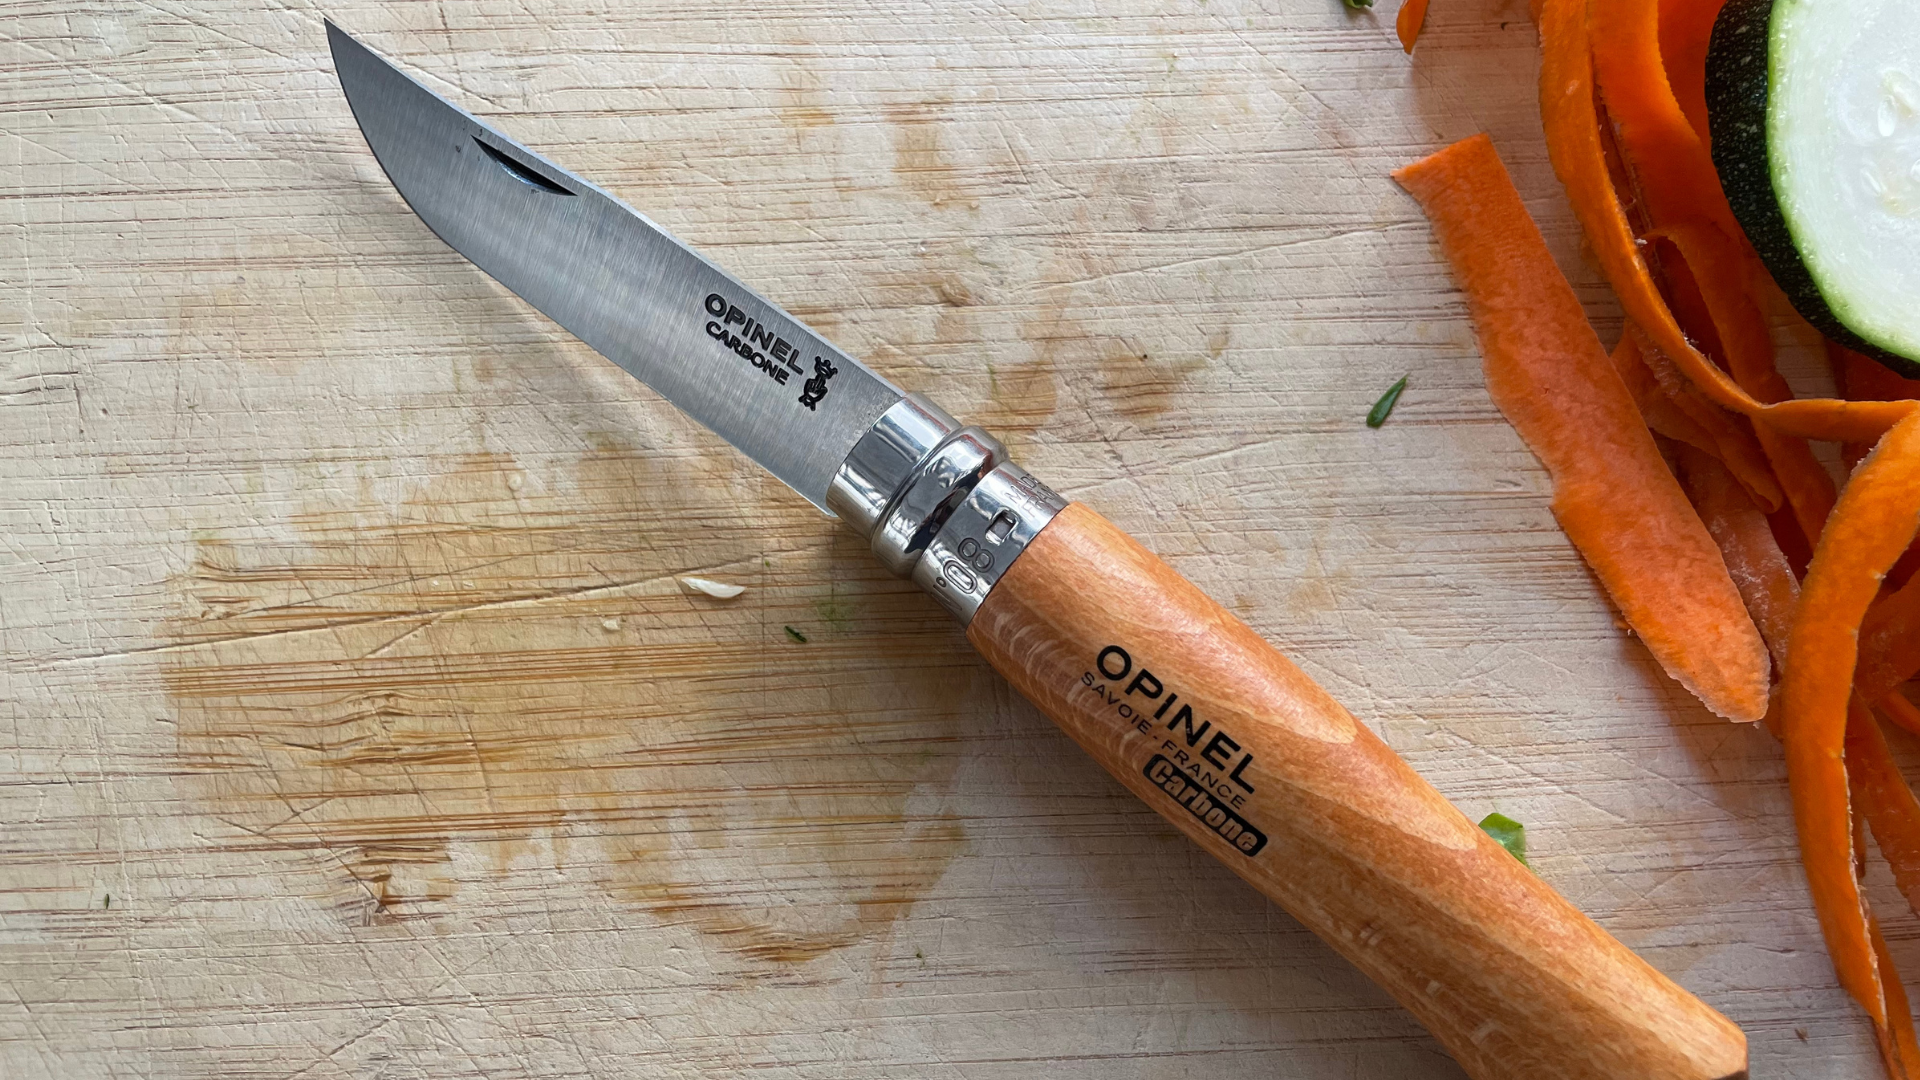 4 Inch Field Honing Stick - OPINEL USA